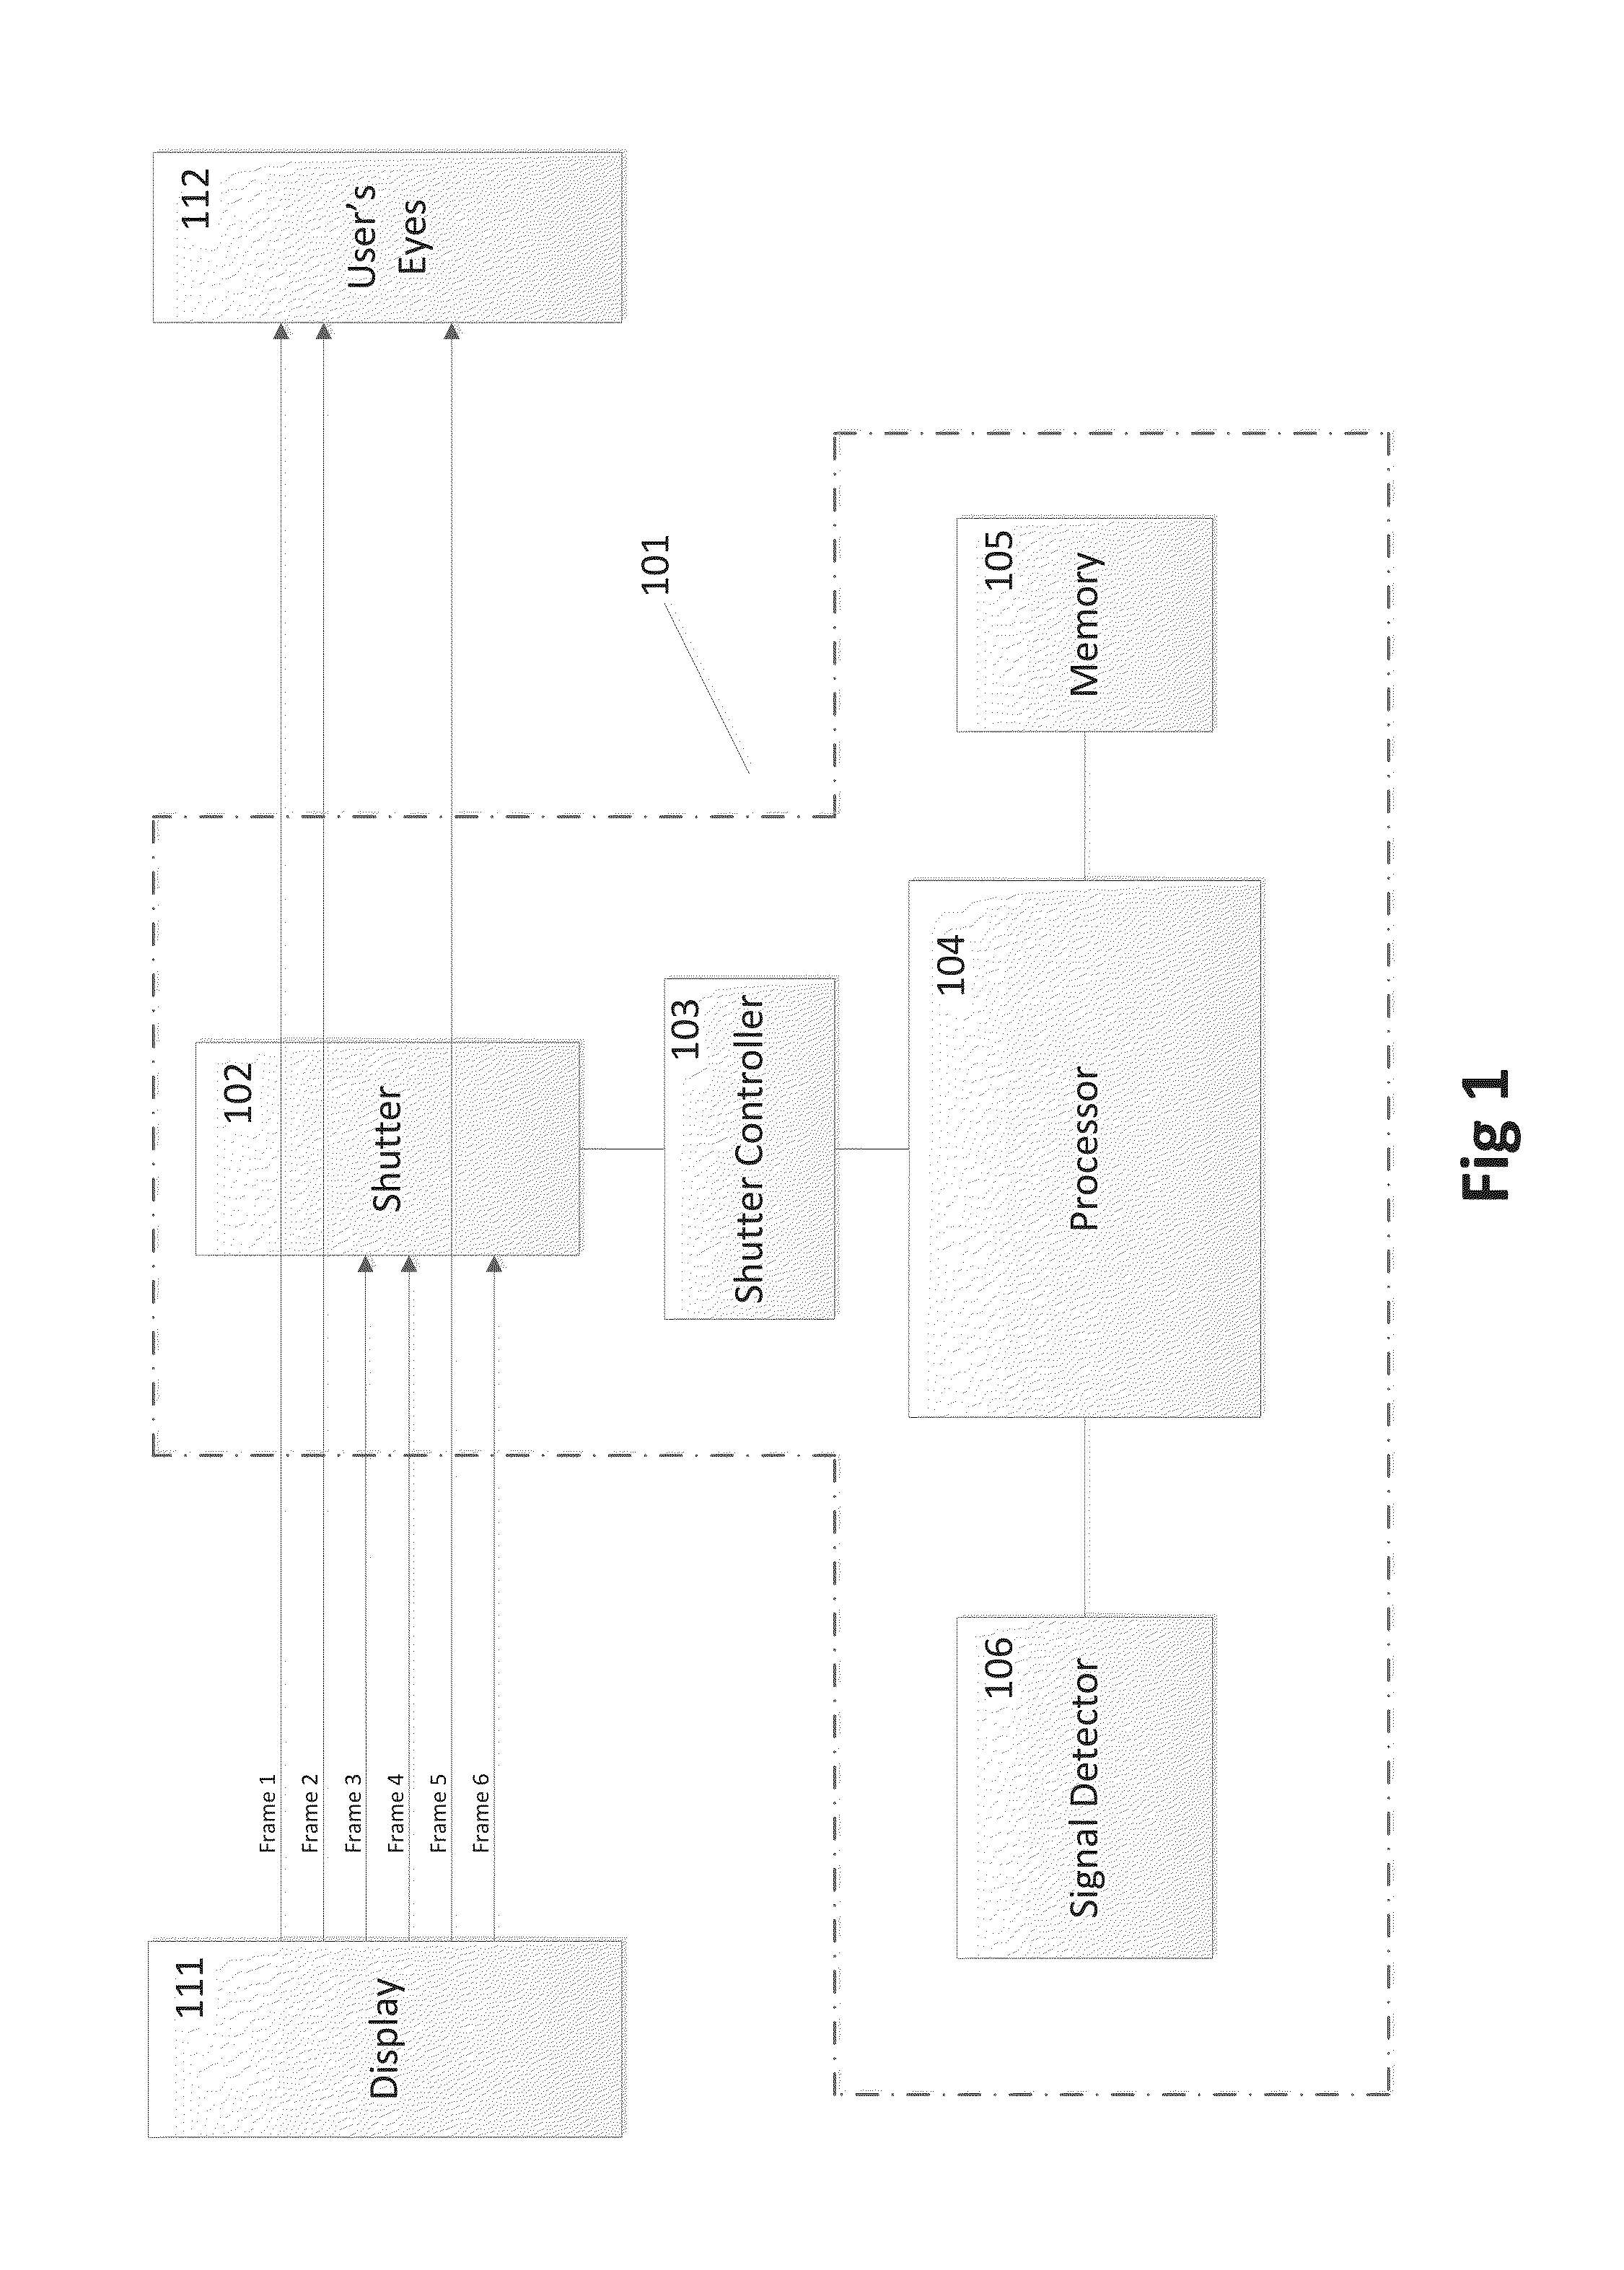 Use of active shutter device to securely display content